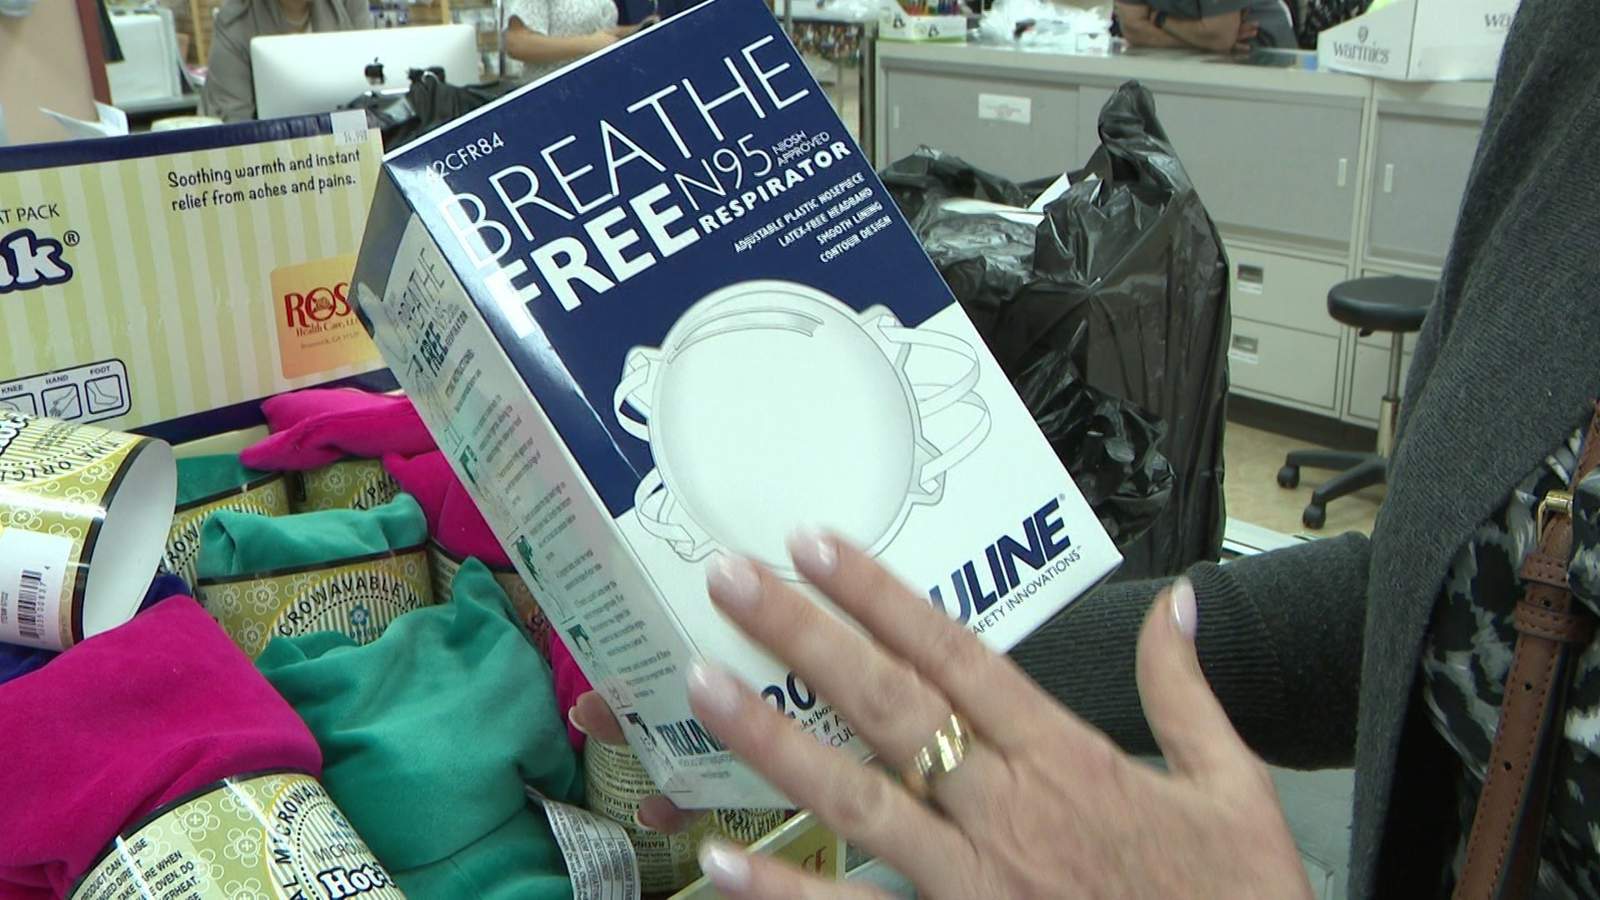 Local doctor says this mask prevents the spread of coronavirus, but it’s selling out fast